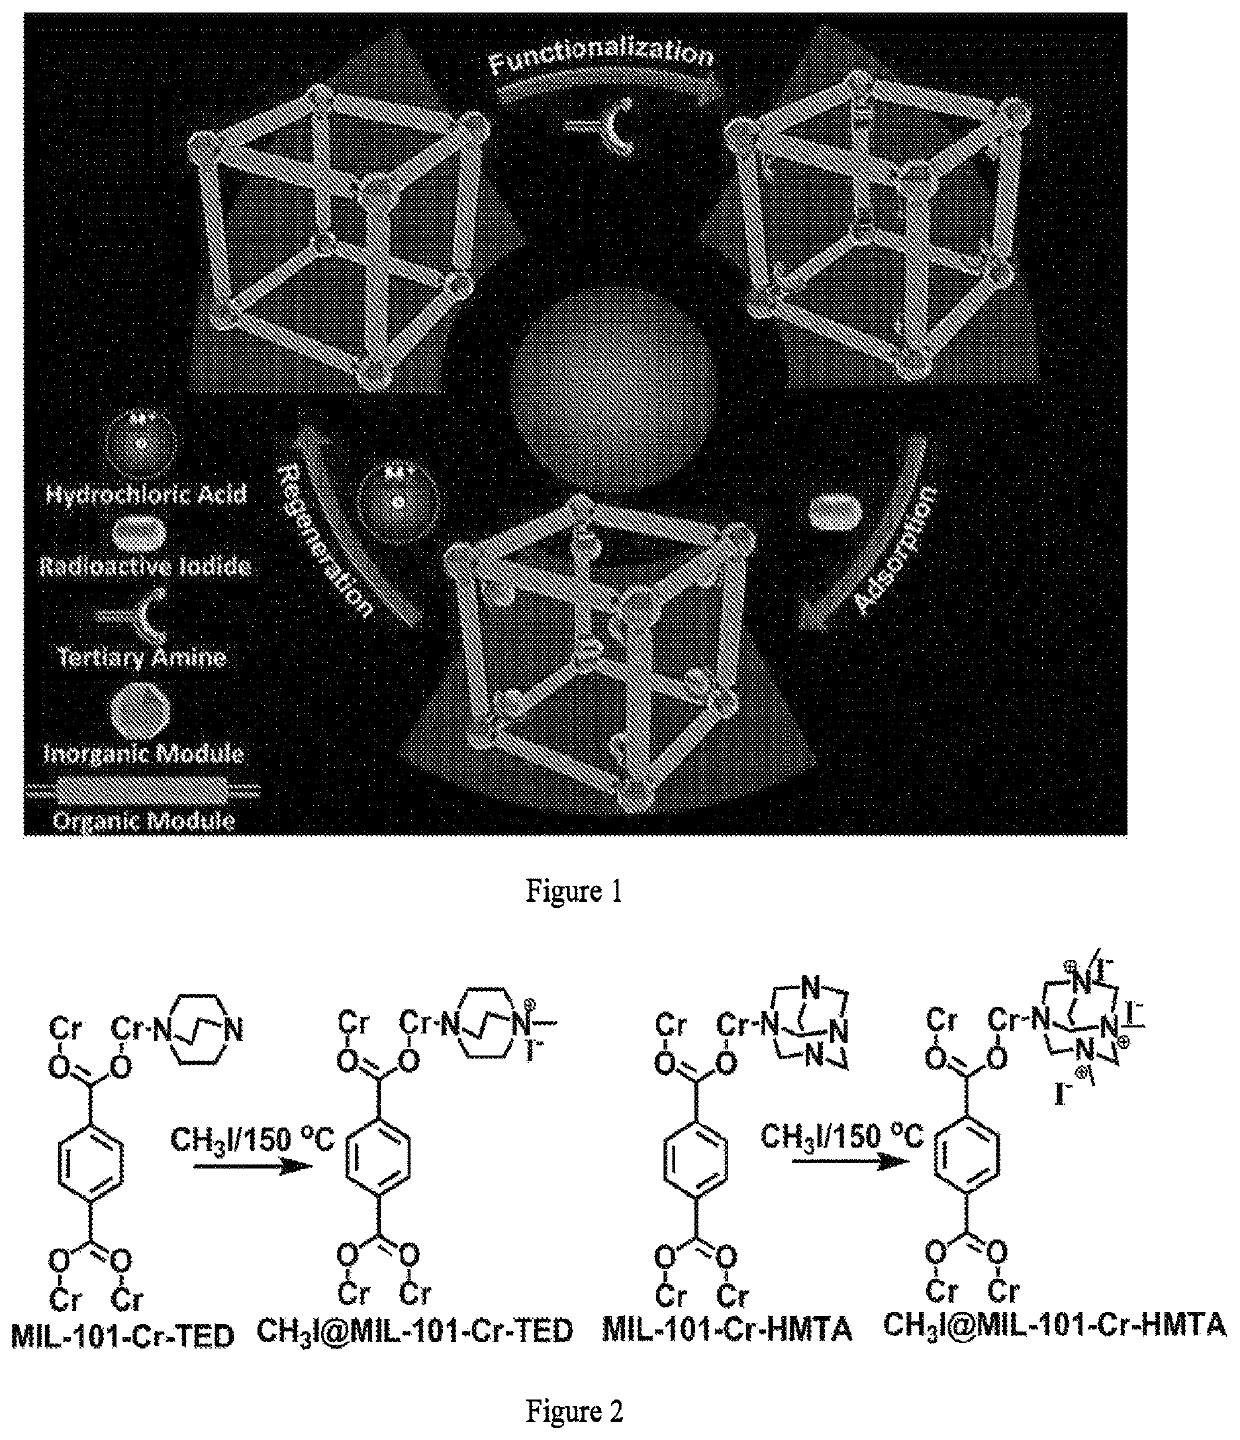 Metal-organic framework based molecular traps for capture of radioactive organic iodides from nuclear waste